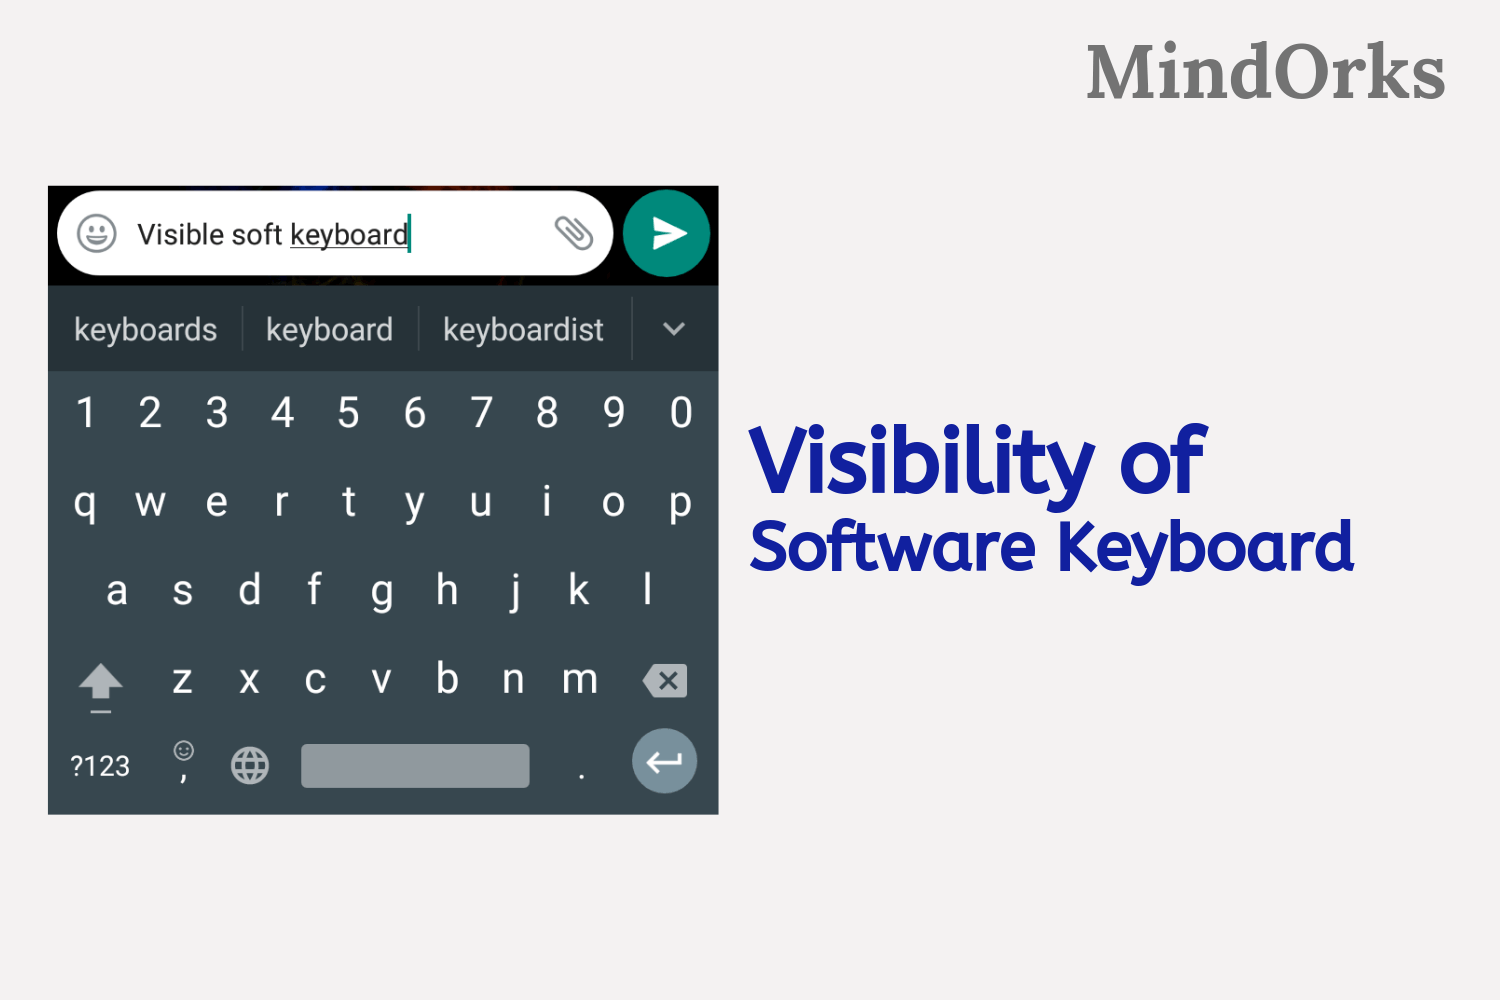 How to check the visibility of software keyboard in Android?